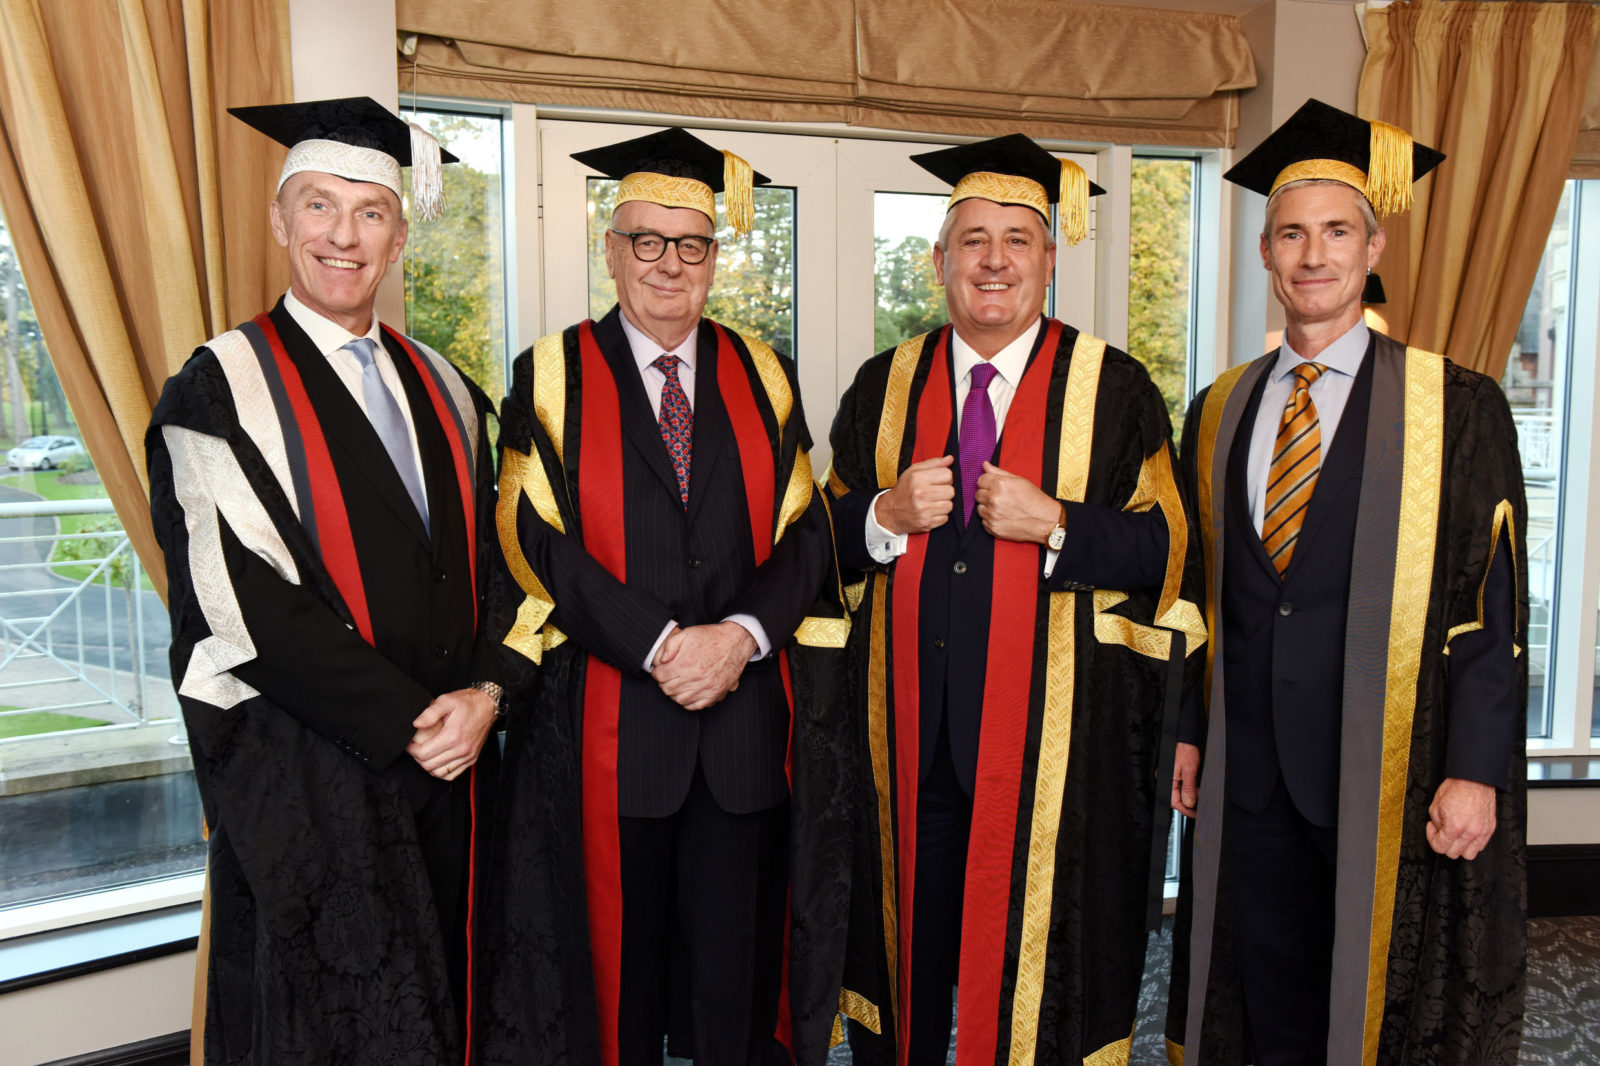 New Chancellor at Teesside University